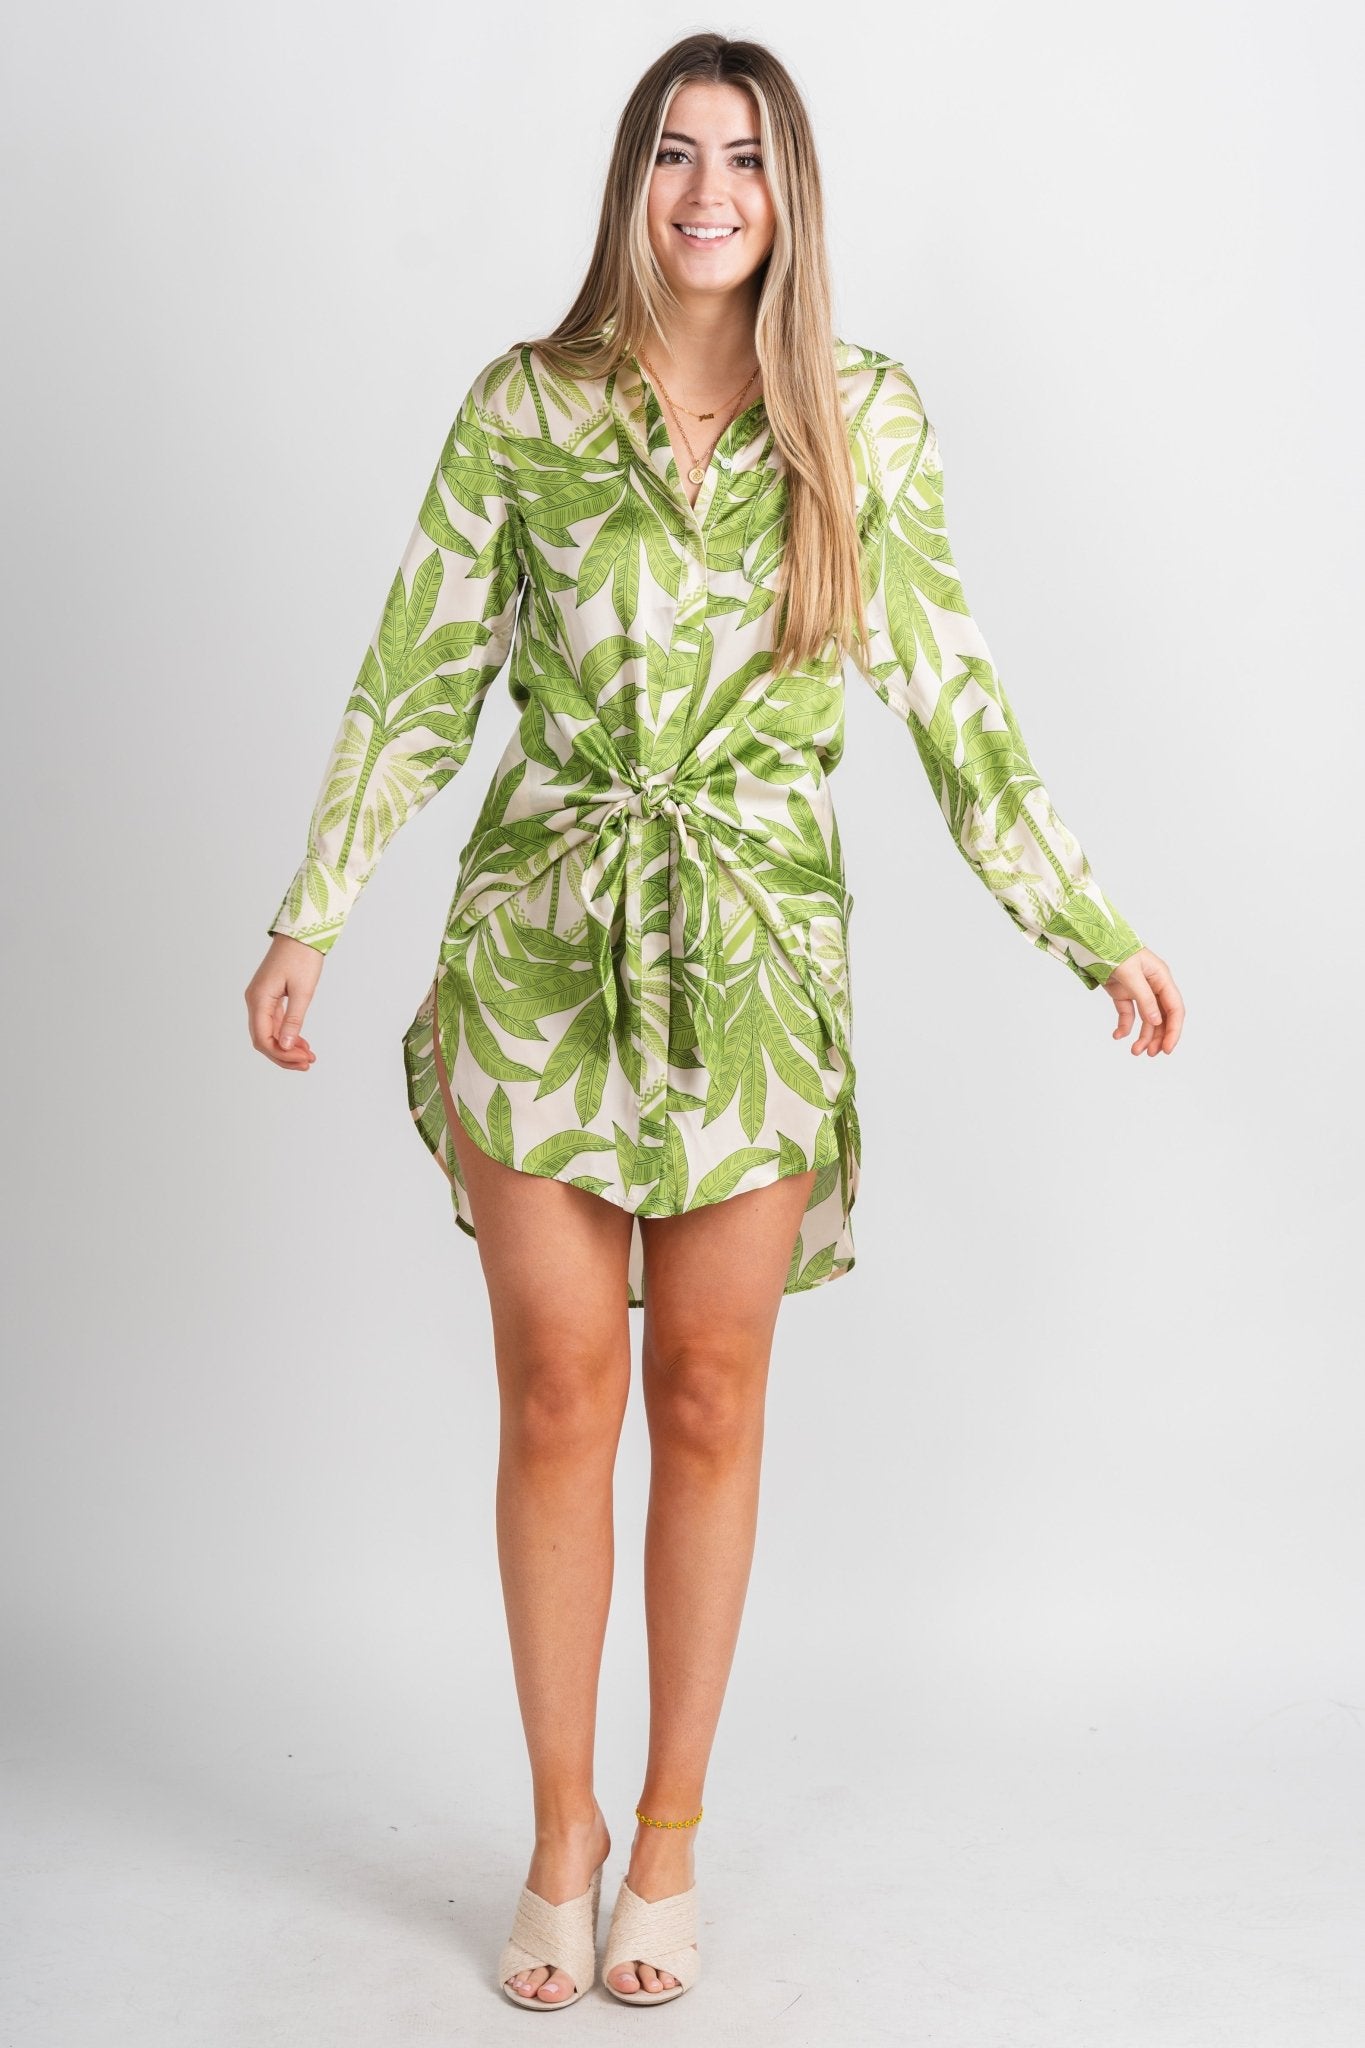 Tropical leaf tie waist dress green - Stylish dress - Trendy Staycation Outfits at Lush Fashion Lounge Boutique in Oklahoma City